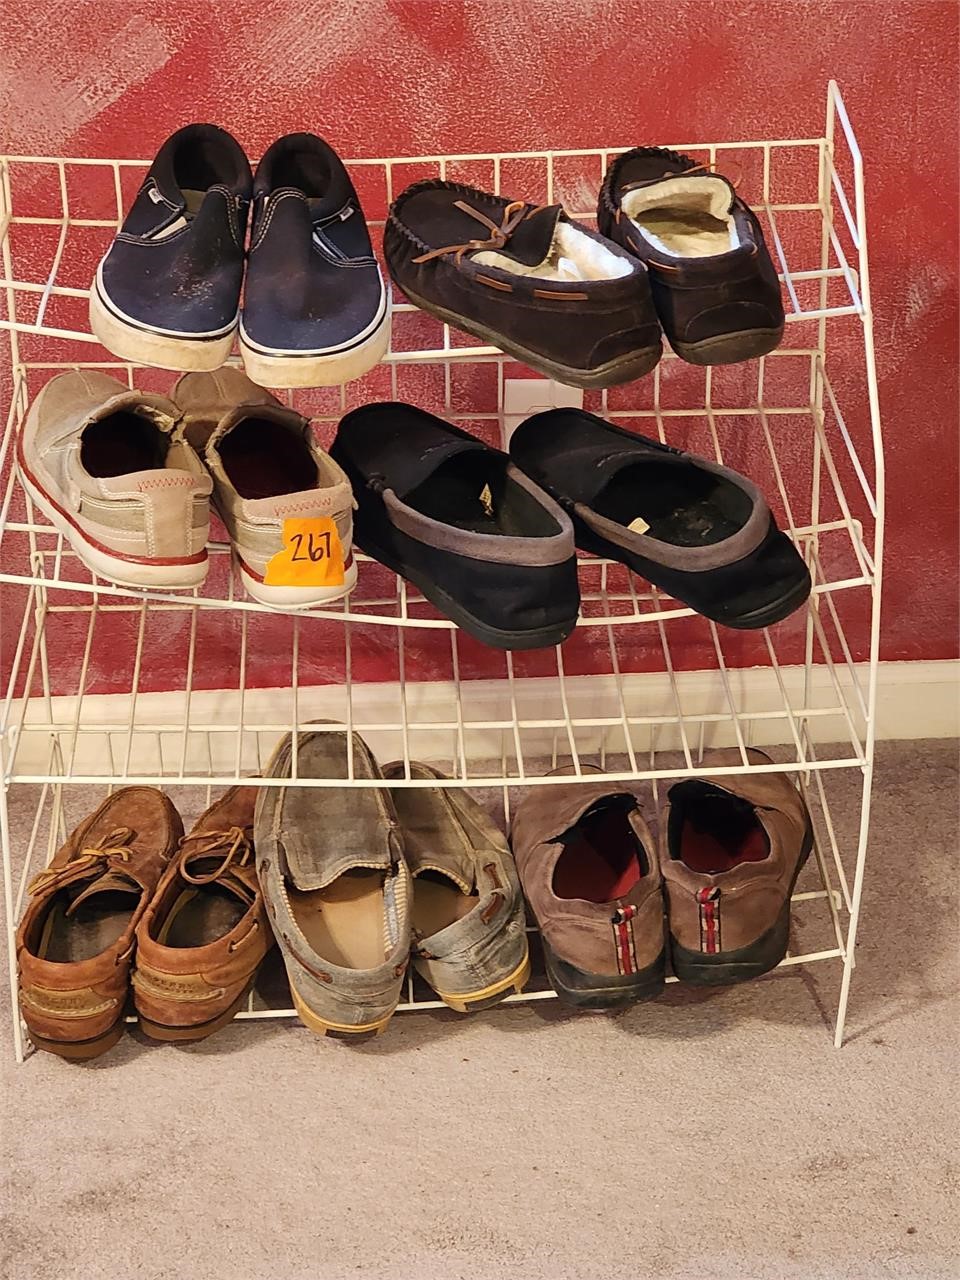 Assorted loafers and rack